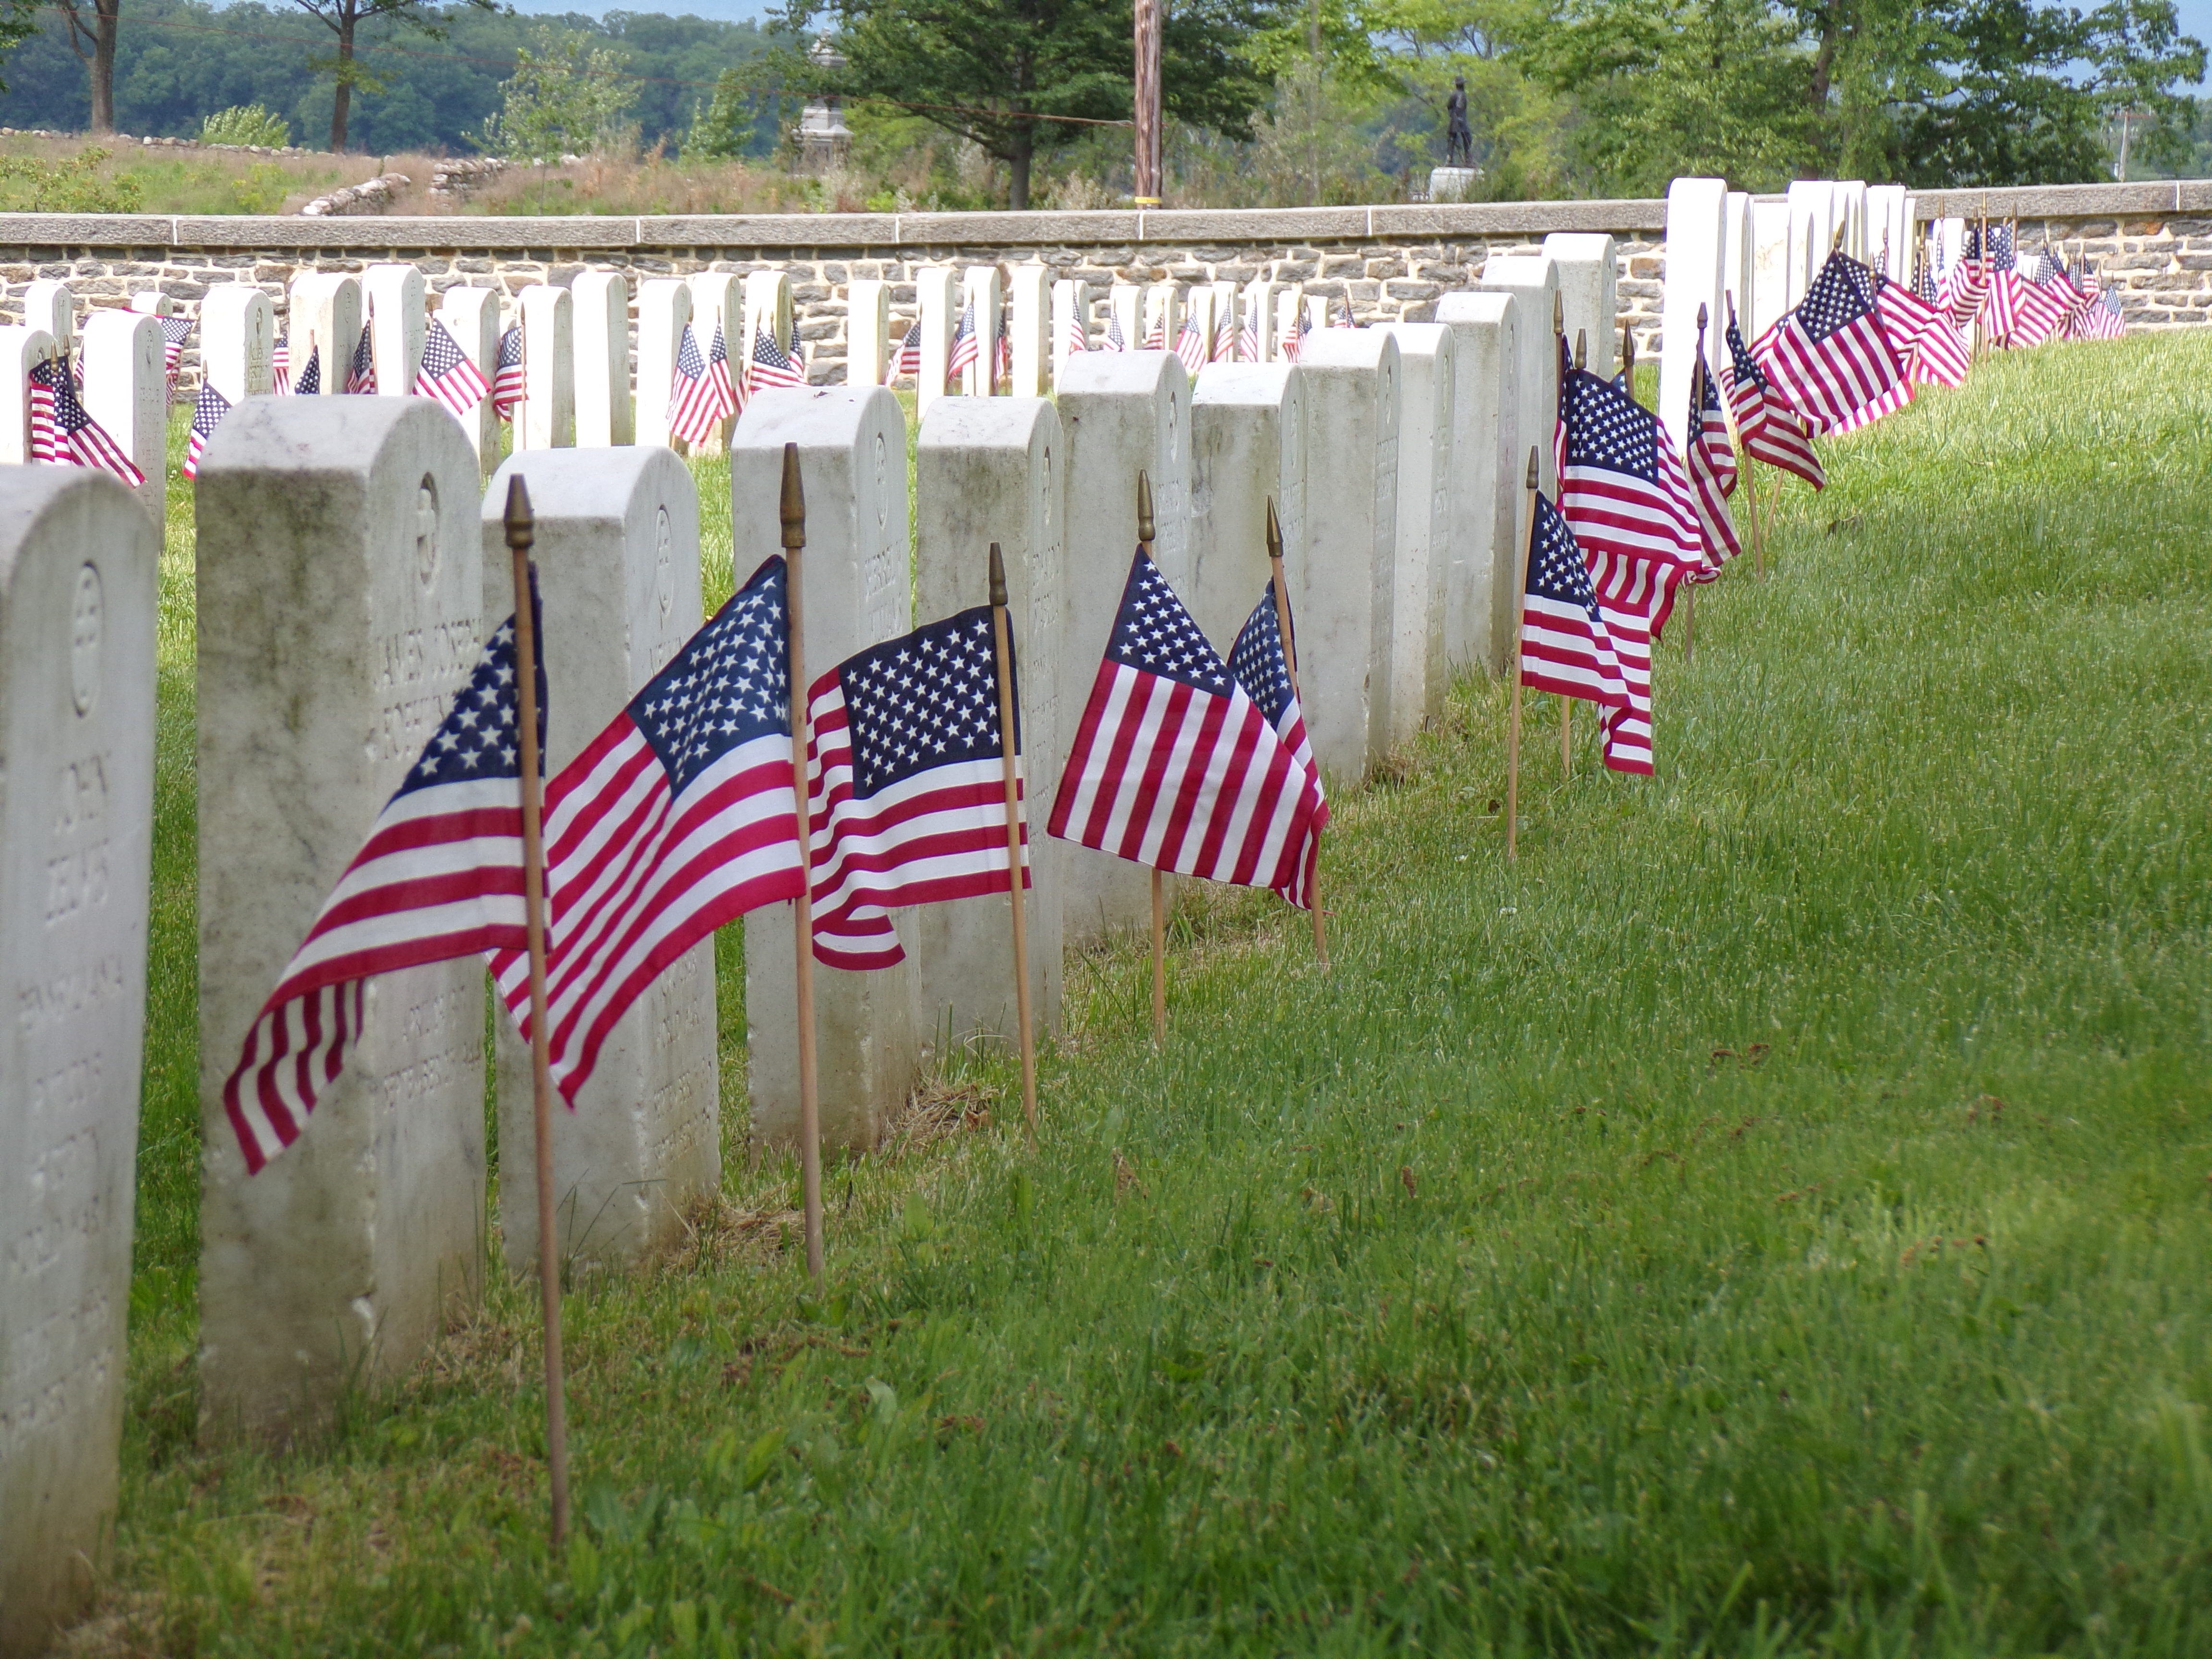 Rows of white marble headstones with small red, white, and blue American flags line up from center to left of the picture. A short stone wall is in the background.